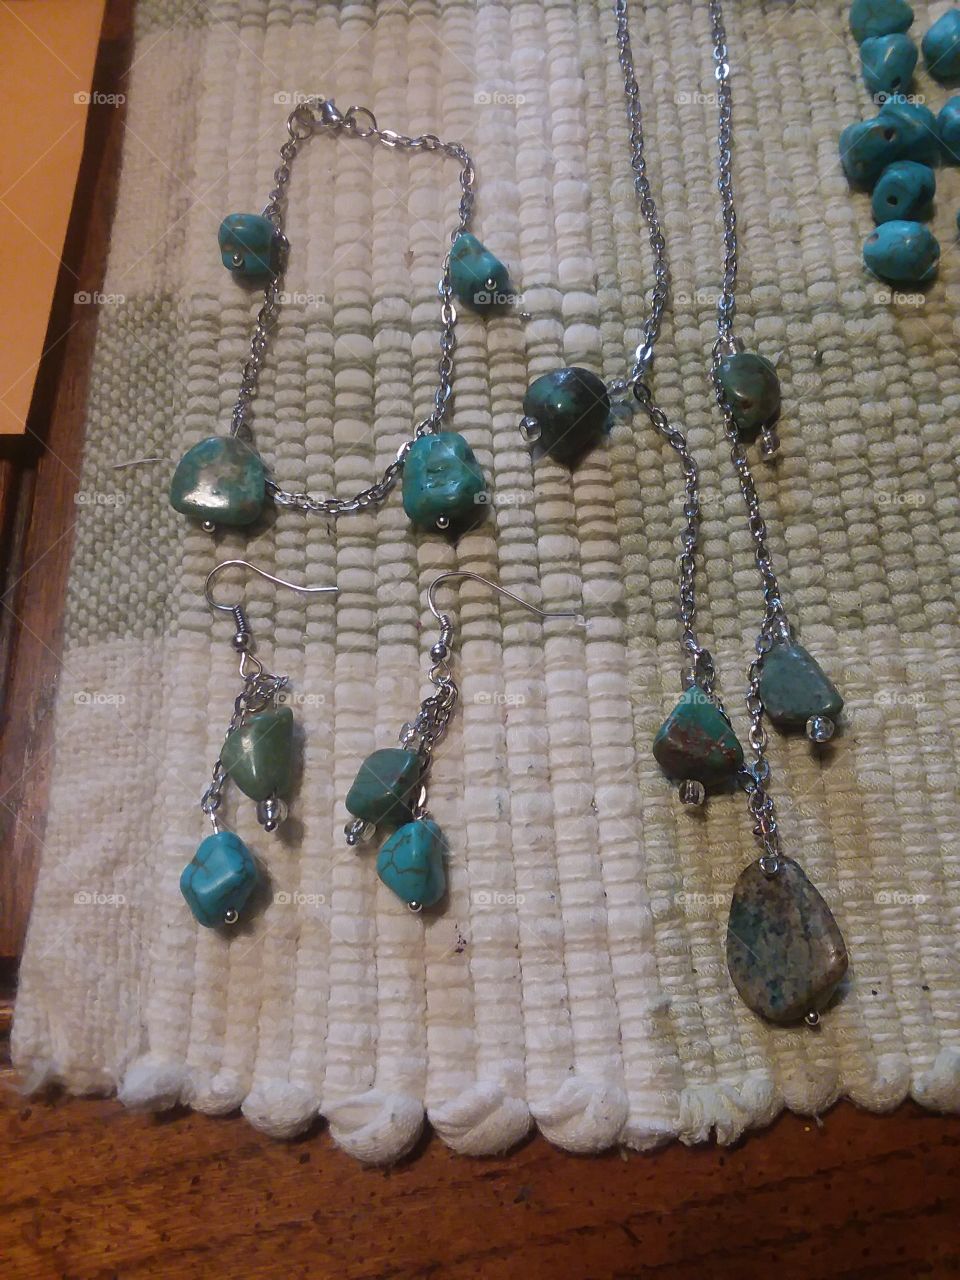 This is handmade turquoise jewelry I made.  This is my own creation and one of a kind piece.